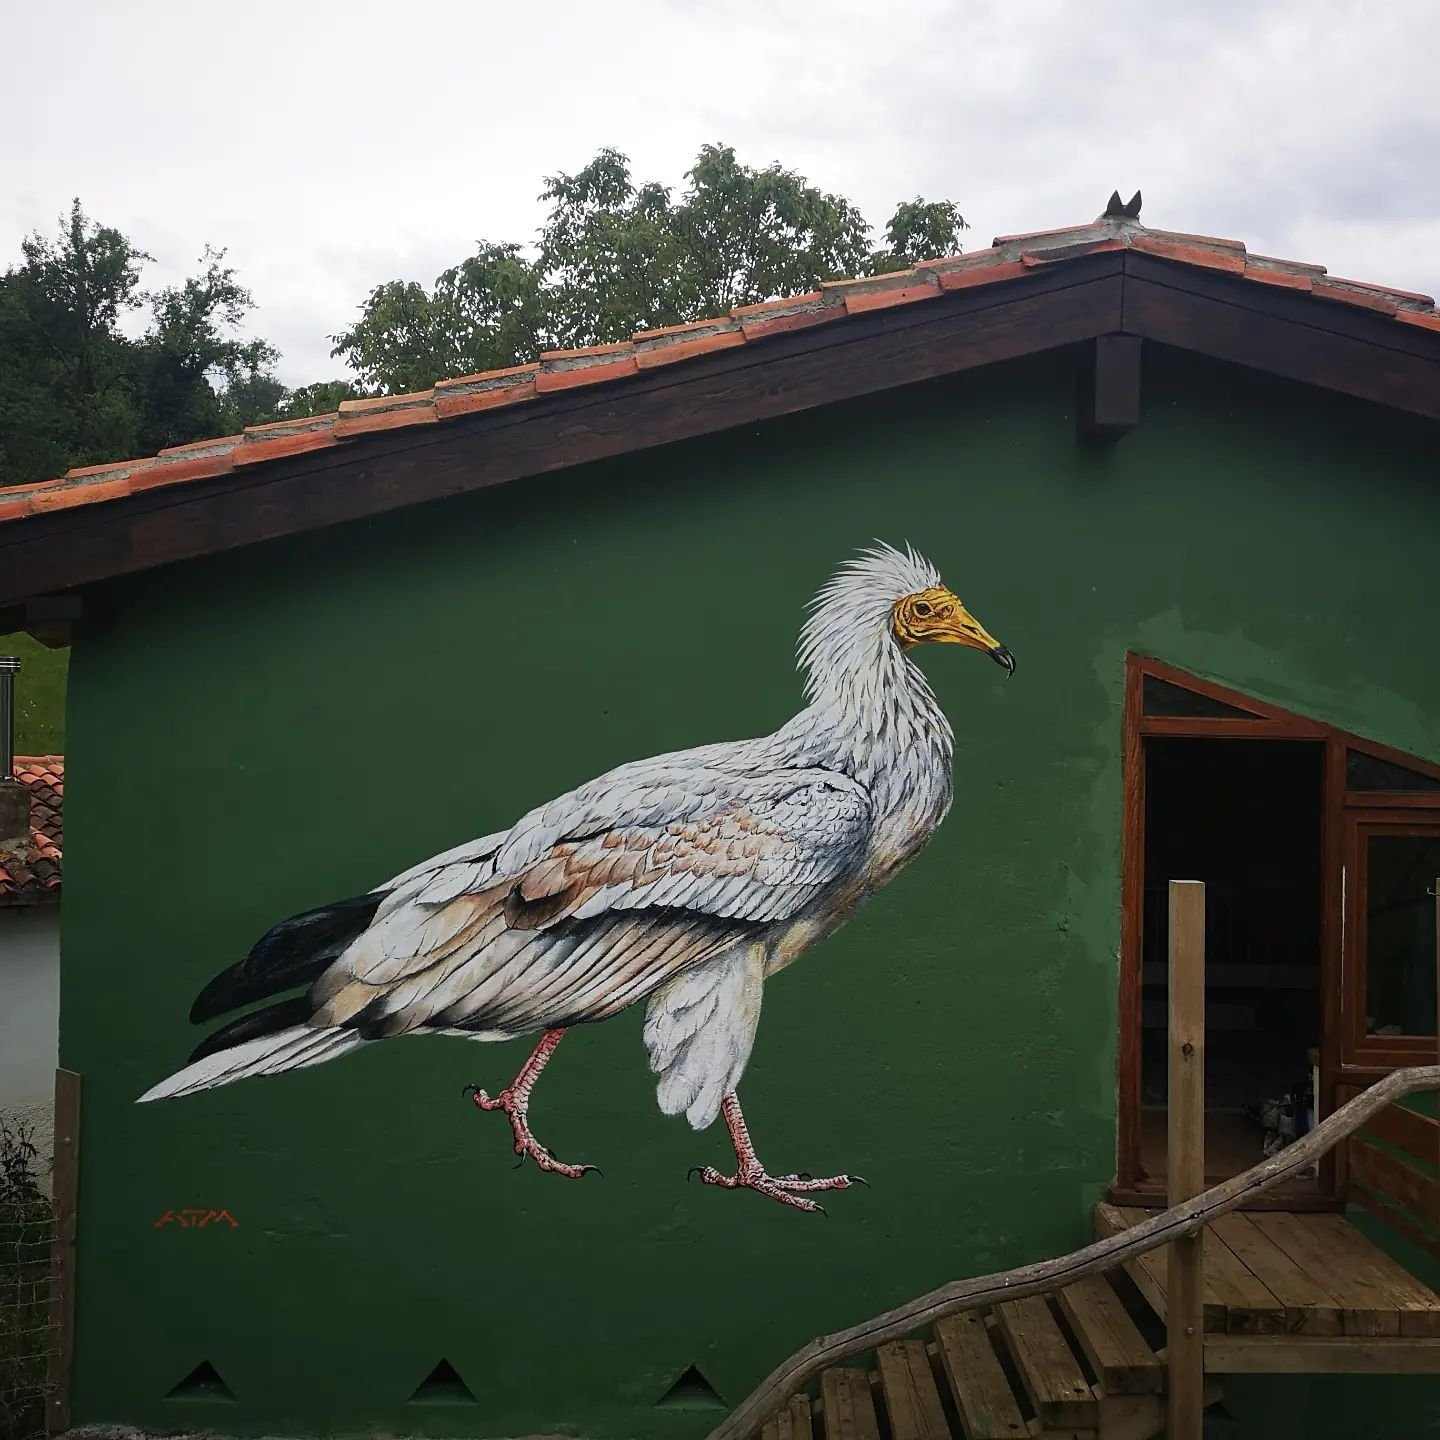 Egyptian Vulture at Wild Finca in Asturias, Spain. I feel so privileged to have been given this opportunity to paint in the very beautiful surroundings of @wildfinca while these magnificent birds soar overhead.

Thank you so much @ksastacey and @lmas